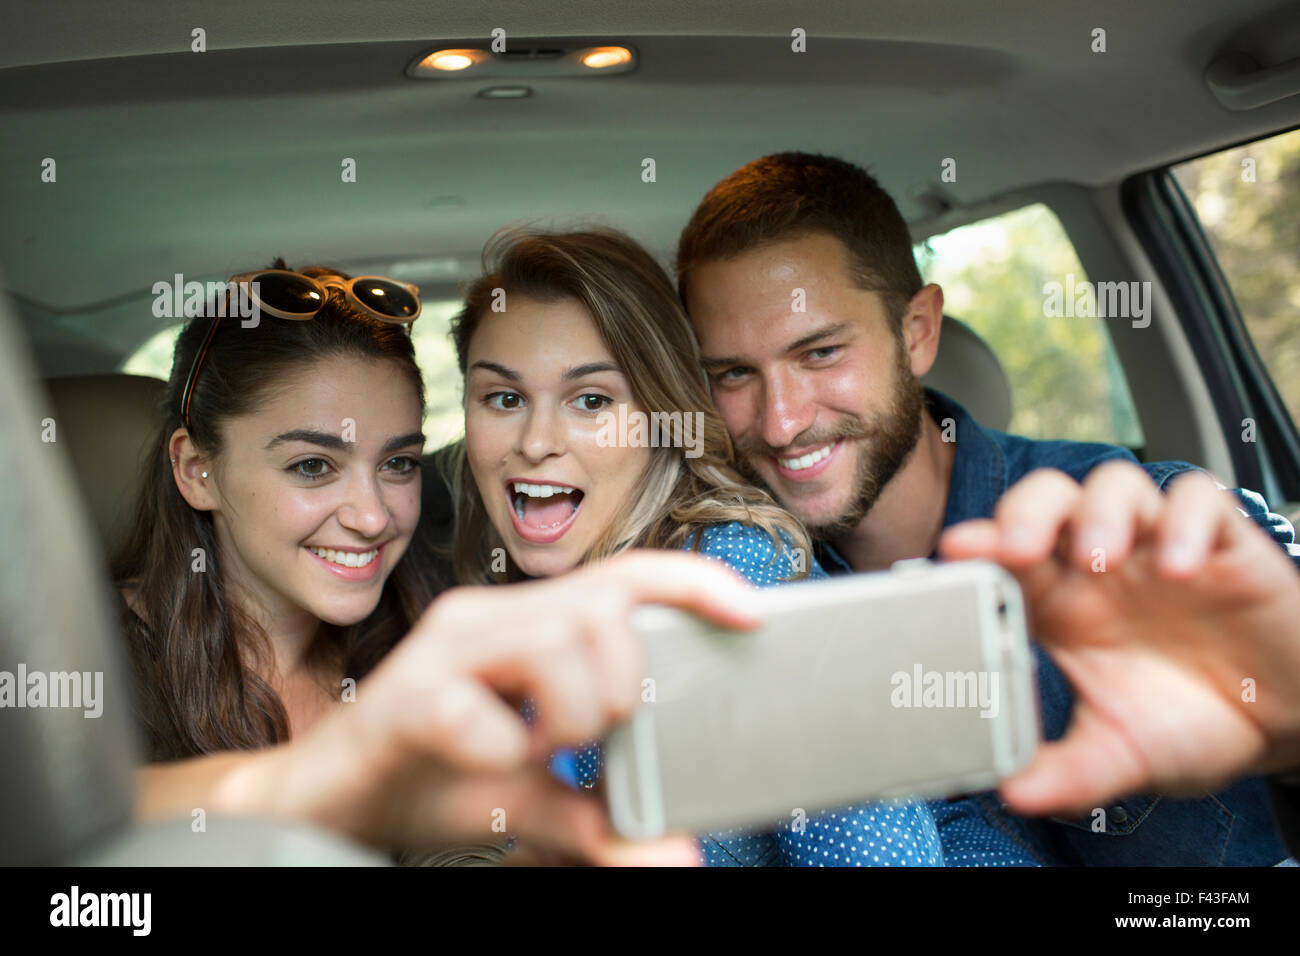 A group of people inside a car, two women and a man taking a selfy. Stock Photo